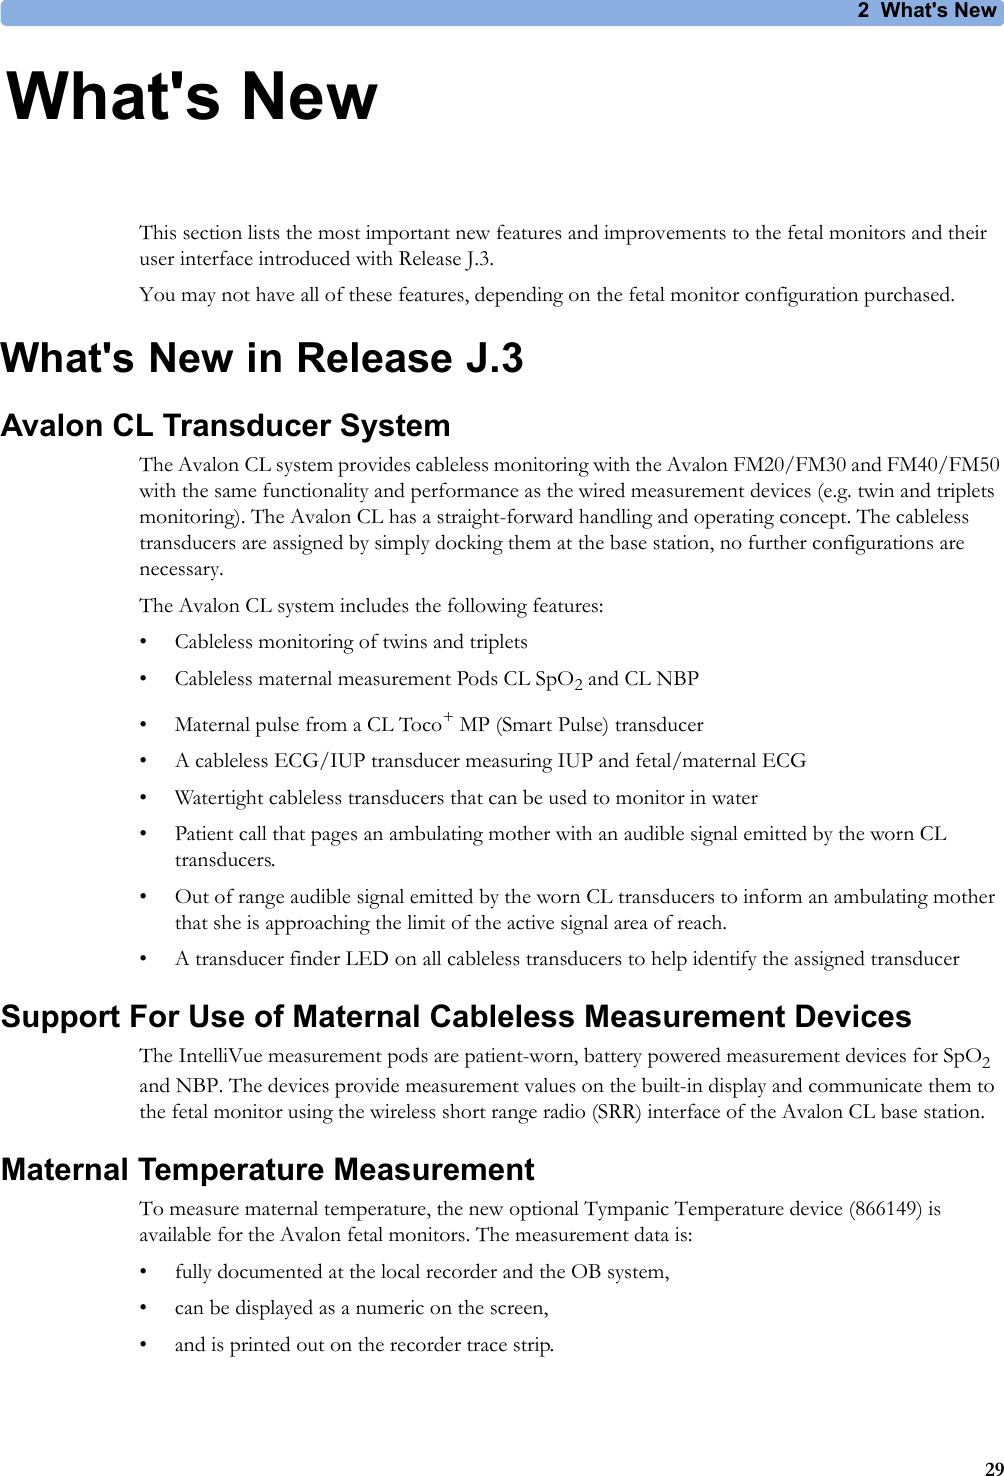 2What&apos;s New292What&apos;s NewThis section lists the most important new features and improvements to the fetal monitors and their user interface introduced with Release J.3. You may not have all of these features, depending on the fetal monitor configuration purchased.What&apos;s New in Release J.3Avalon CL Transducer SystemThe Avalon CL system provides cableless monitoring with the Avalon FM20/FM30 and FM40/FM50 with the same functionality and performance as the wired measurement devices (e.g. twin and triplets monitoring). The Avalon CL has a straight-forward handling and operating concept. The cableless transducers are assigned by simply docking them at the base station, no further configurations are necessary.The Avalon CL system includes the following features:• Cableless monitoring of twins and triplets• Cableless maternal measurement Pods CL SpO2 and CL NBP• Maternal pulse from a CL Toco+MP (Smart Pulse) transducer• A cableless ECG/IUP transducer measuring IUP and fetal/maternal ECG• Watertight cableless transducers that can be used to monitor in water• Patient call that pages an ambulating mother with an audible signal emitted by the worn CL transducers.• Out of range audible signal emitted by the worn CL transducers to inform an ambulating mother that she is approaching the limit of the active signal area of reach.• A transducer finder LED on all cableless transducers to help identify the assigned transducerSupport For Use of Maternal Cableless Measurement DevicesThe IntelliVue measurement pods are patient-worn, battery powered measurement devices for SpO2 and NBP. The devices provide measurement values on the built-in display and communicate them to the fetal monitor using the wireless short range radio (SRR) interface of the Avalon CL base station.Maternal Temperature MeasurementTo measure maternal temperature, the new optional Tympanic Temperature device (866149) is available for the Avalon fetal monitors. The measurement data is:• fully documented at the local recorder and the OB system,• can be displayed as a numeric on the screen,• and is printed out on the recorder trace strip.